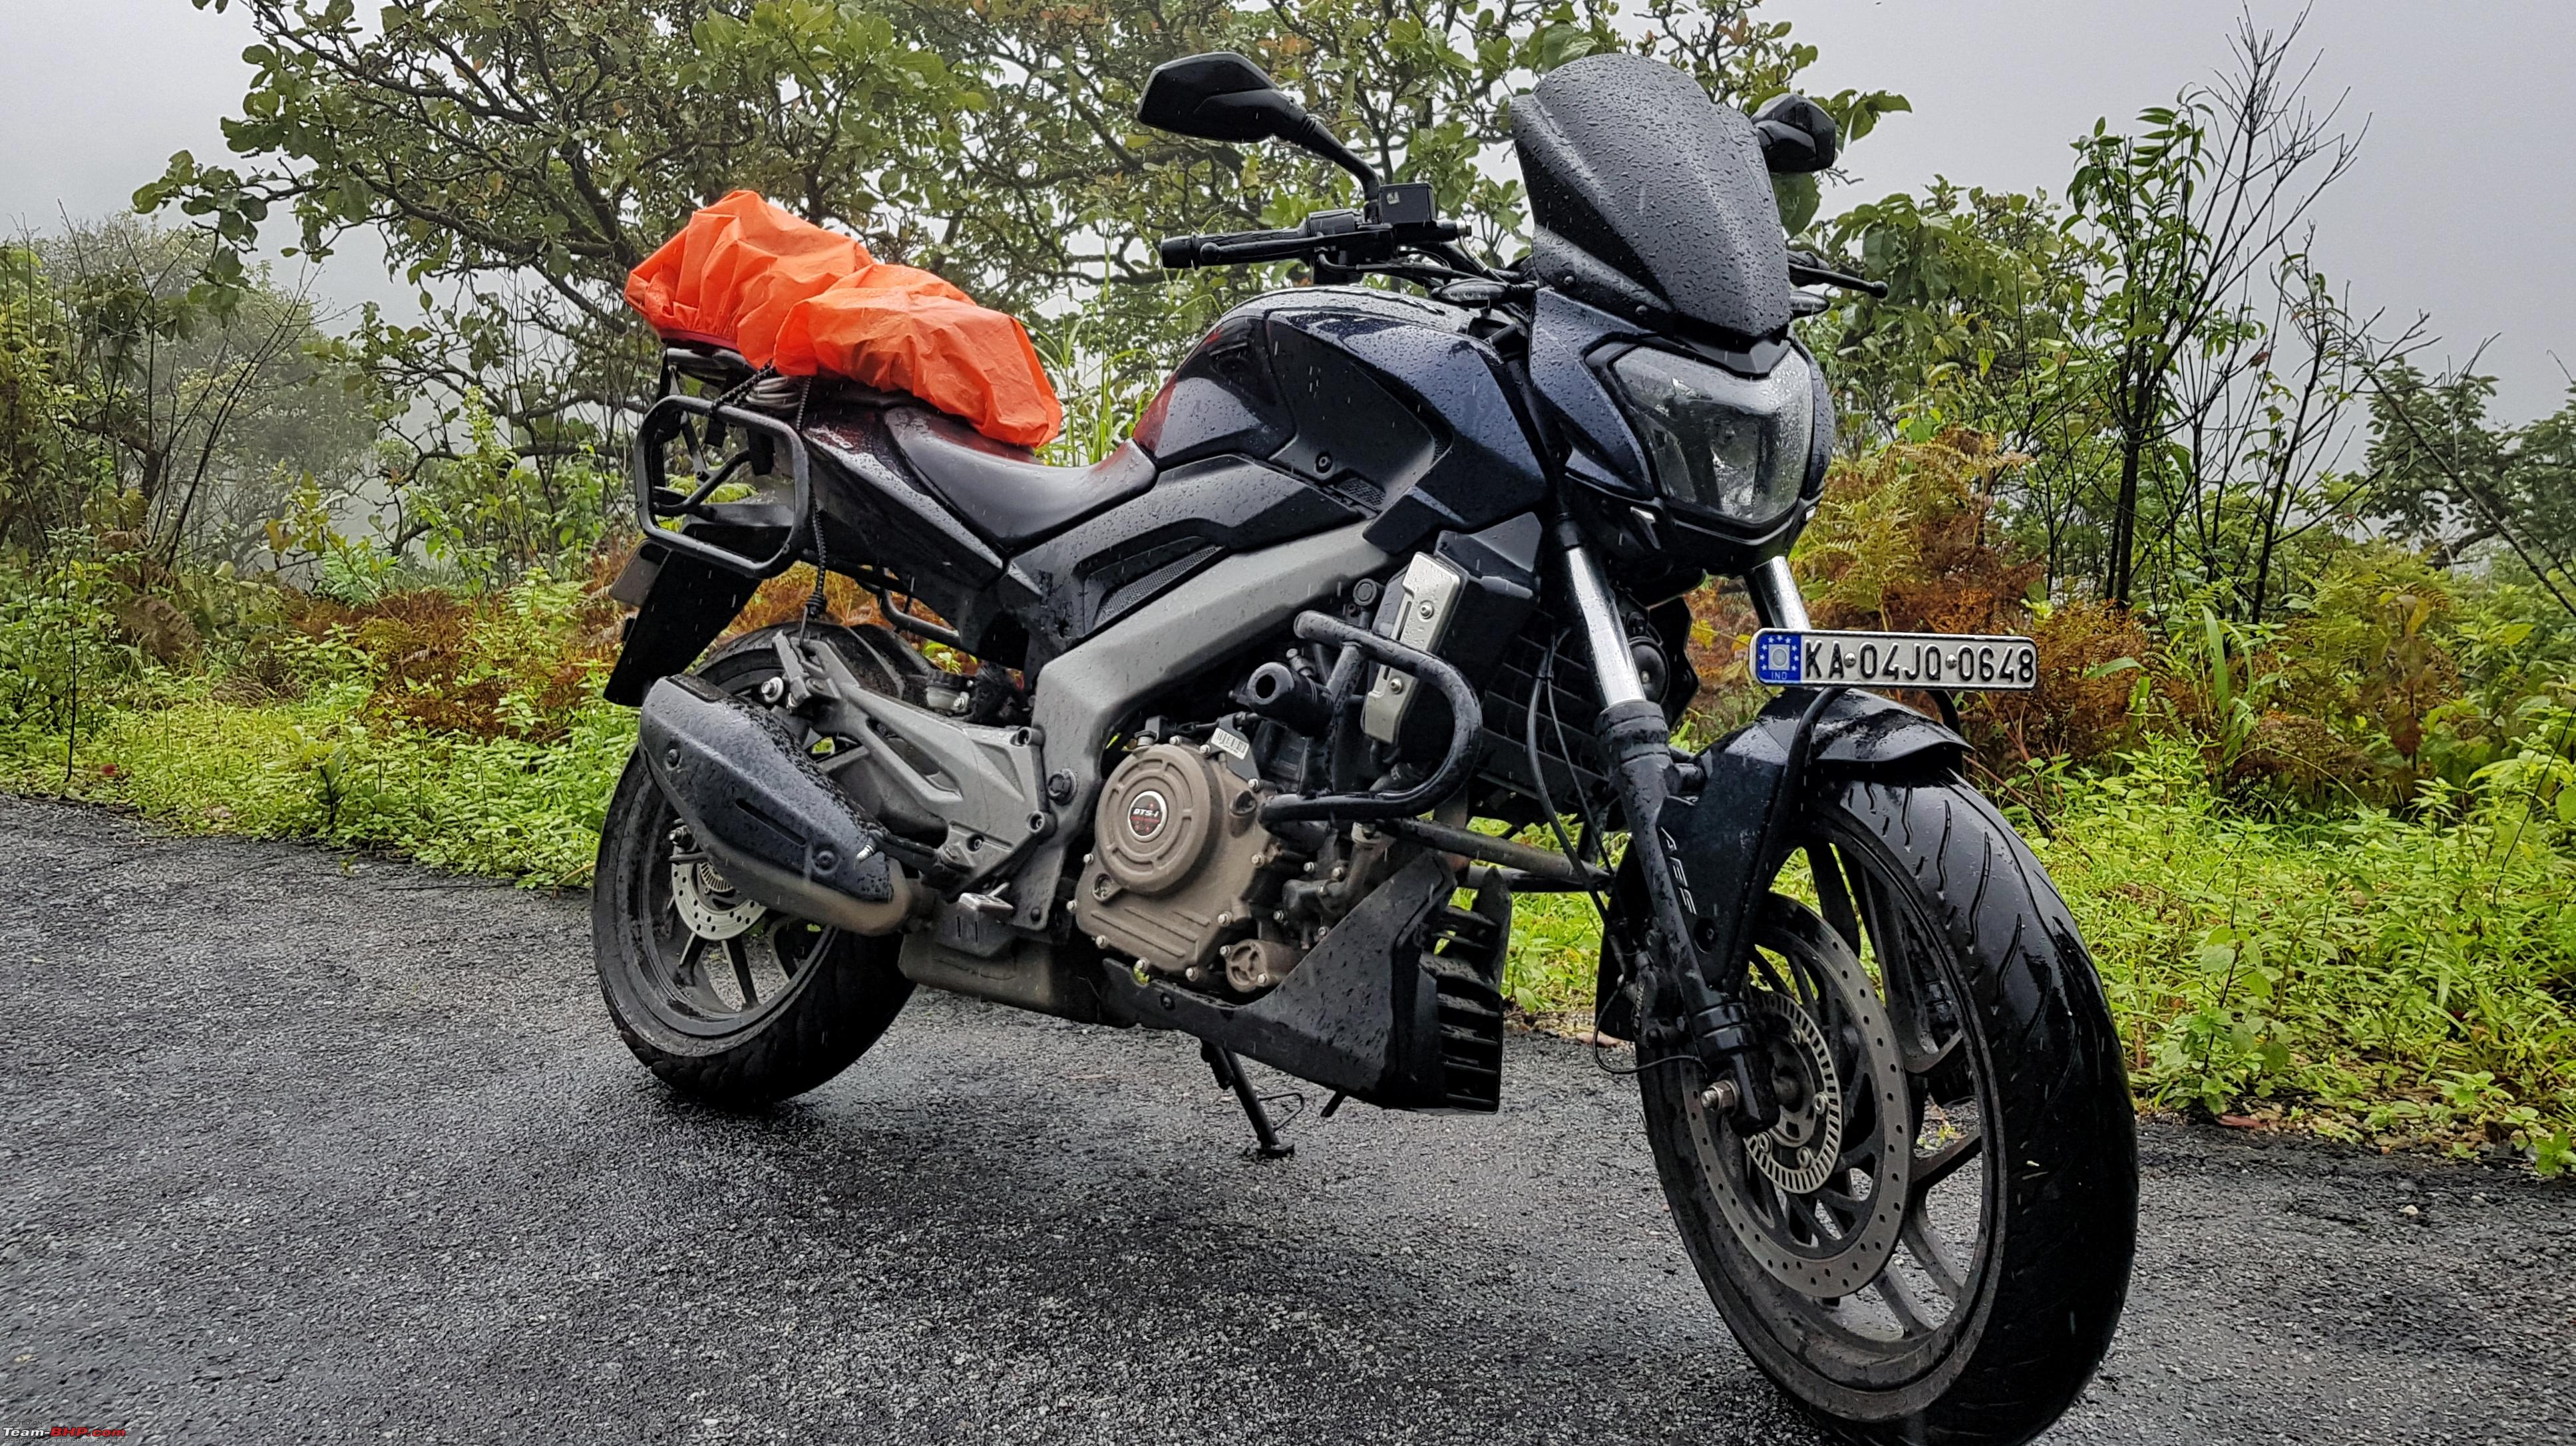 touring accessories for dominar 400